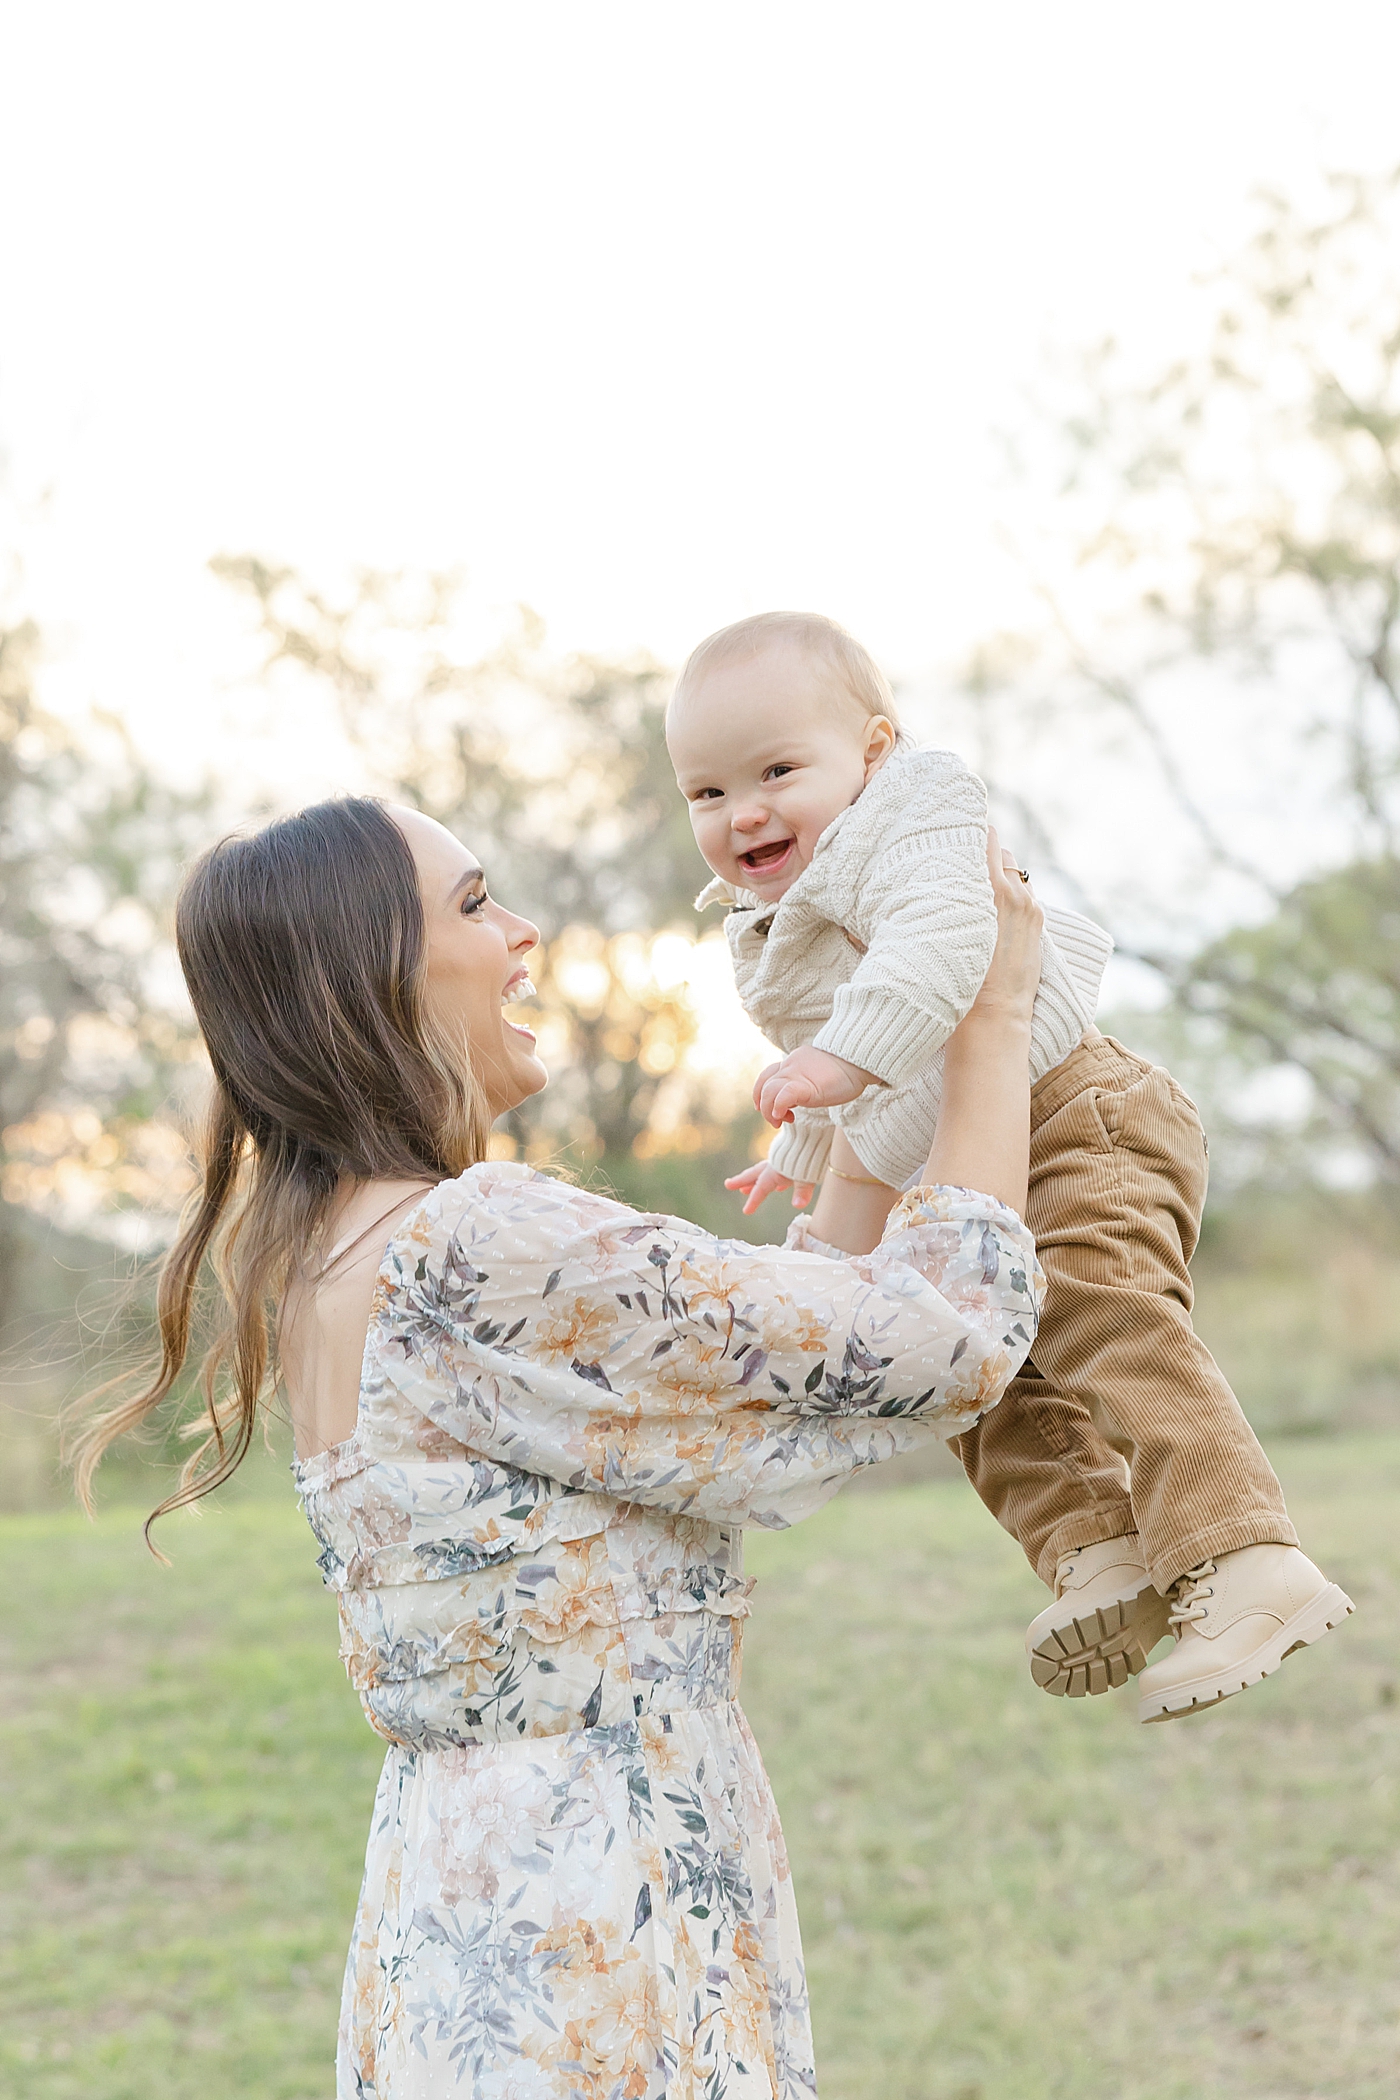 Mom playing with her baby during their Spring Family Sessions in Austin | Image by Sana Ahmed Photography